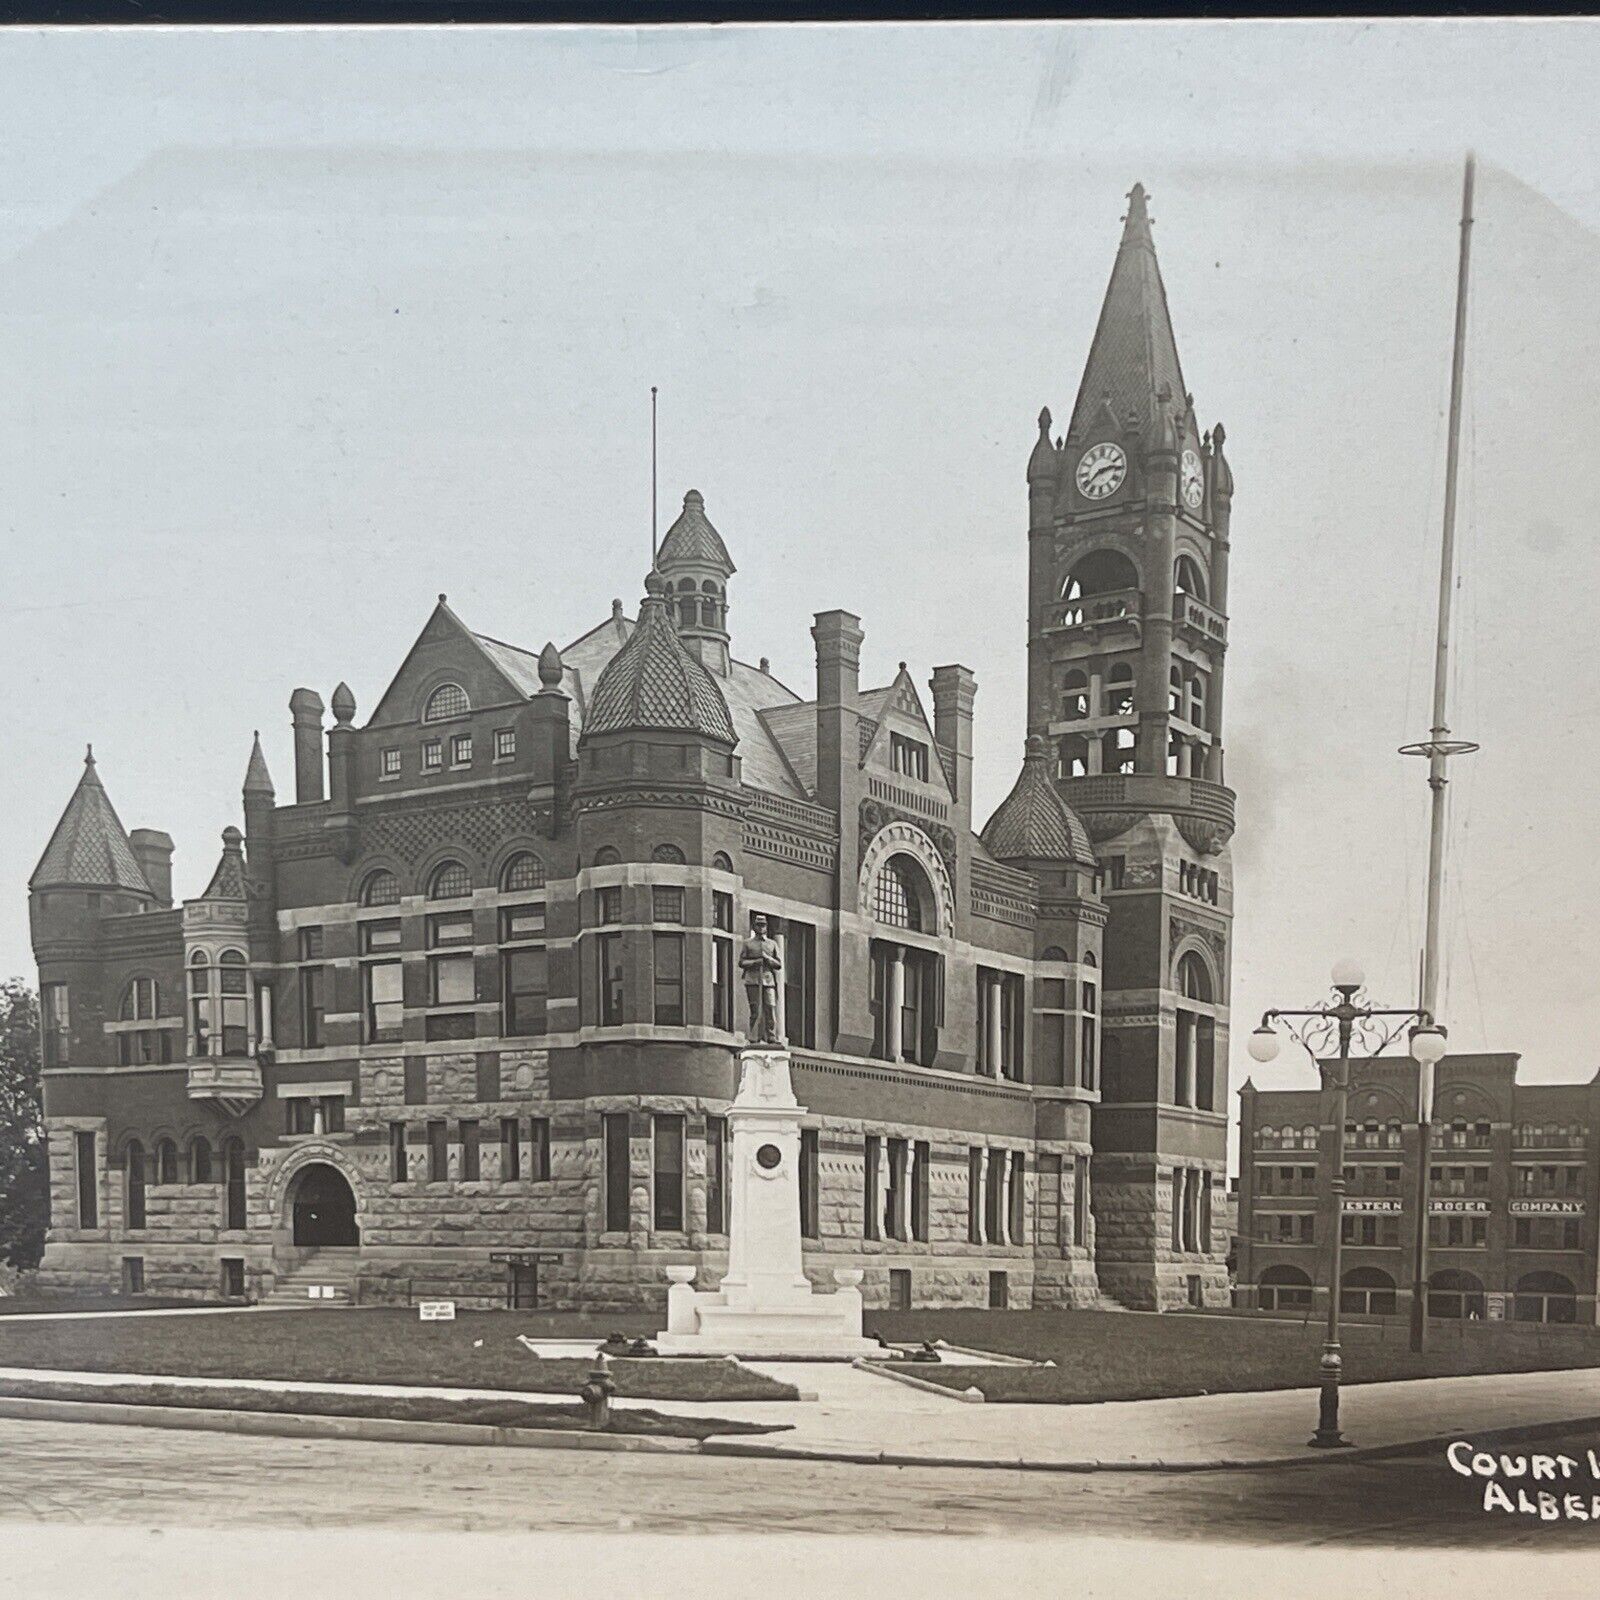 Early 1900s real photo postcard of the courthouse at Albert Lea Minnesota